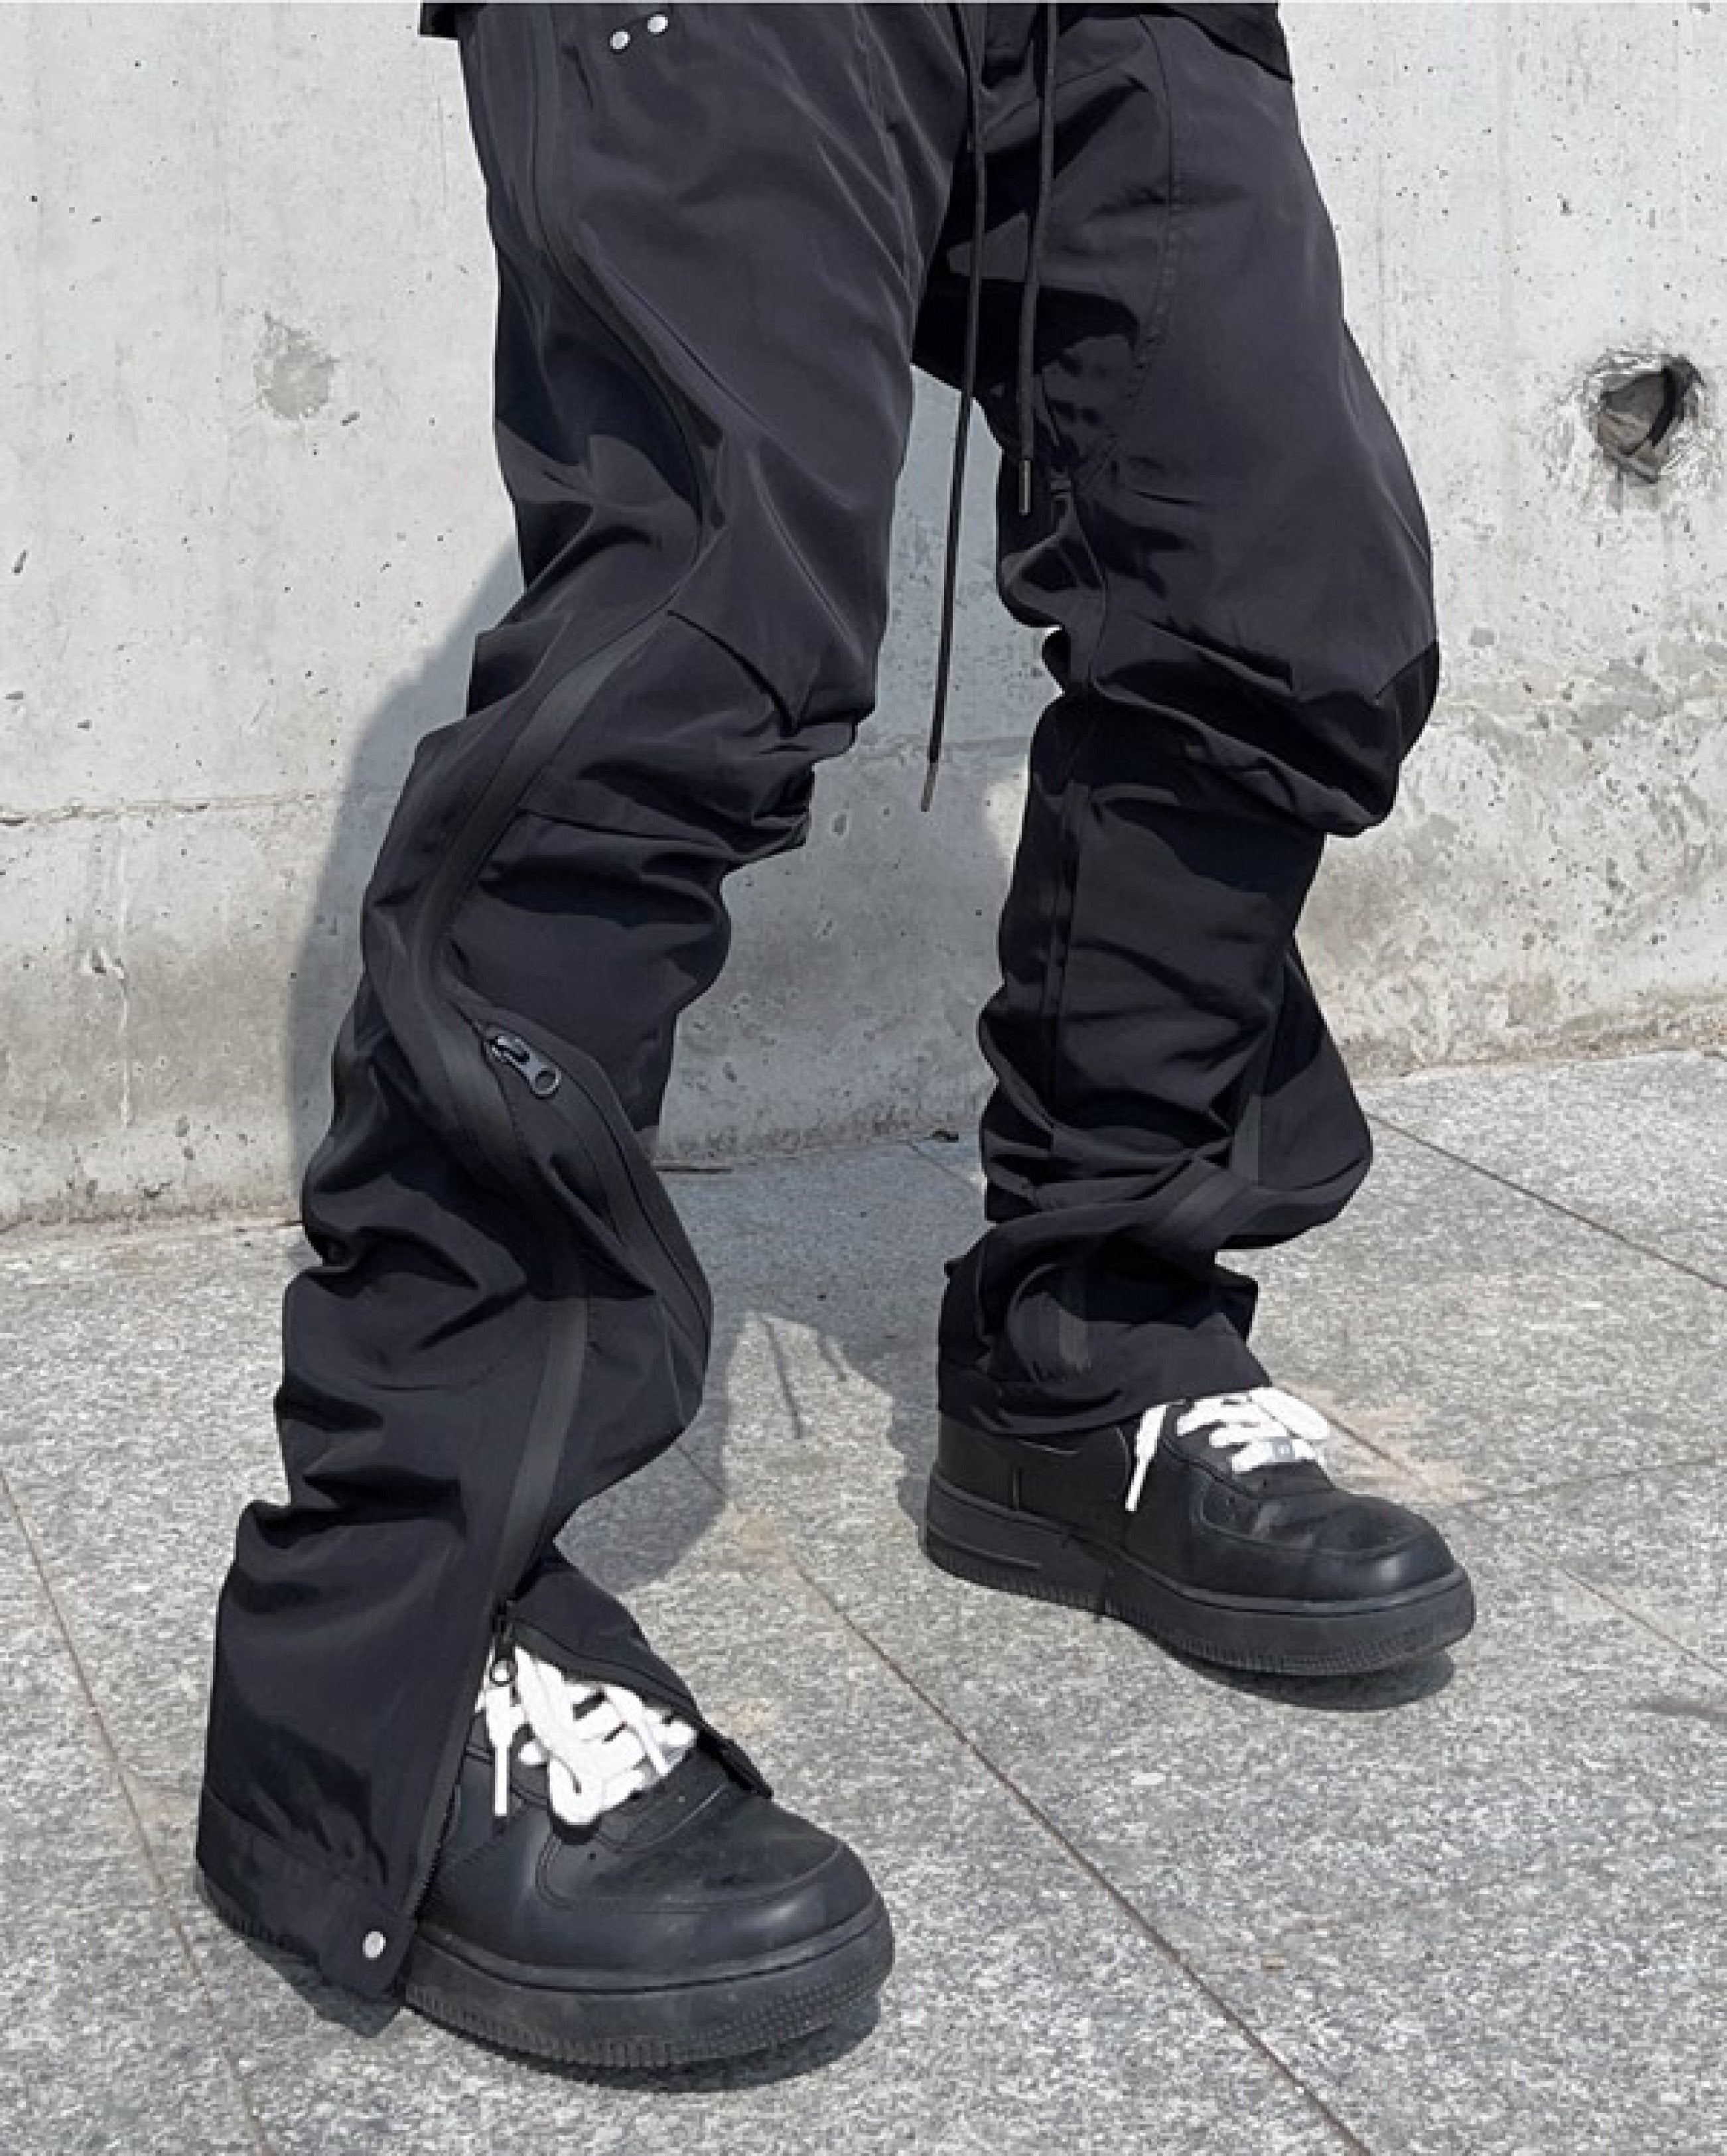 RCC Classic Twill Pants - Black - Red Clouds Collective - Made in the USA